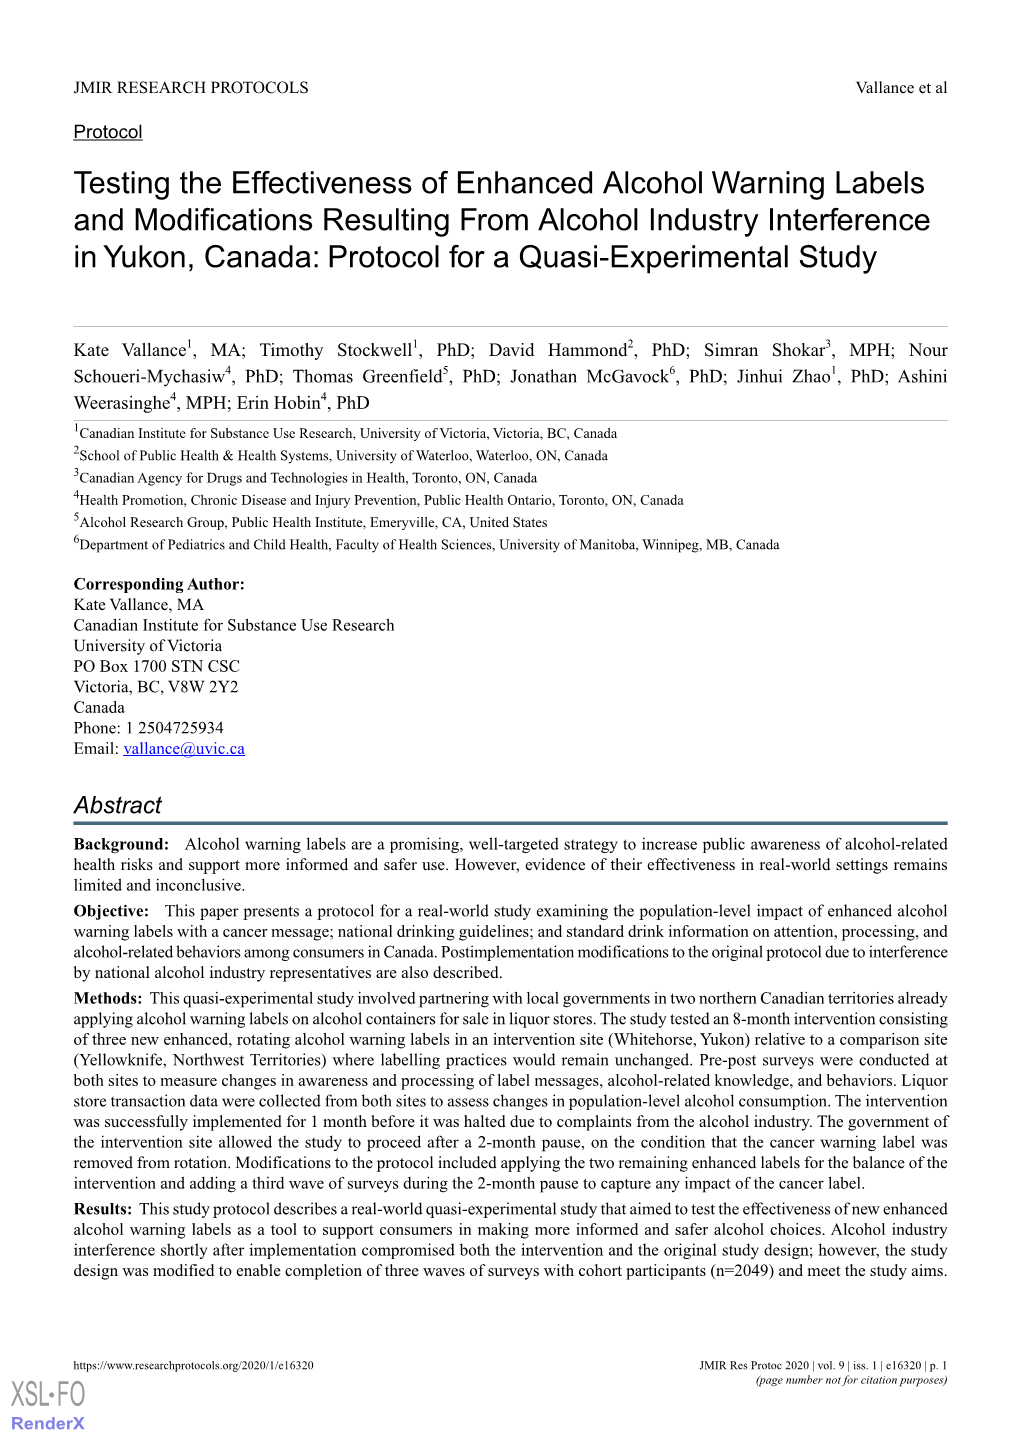 Testing the Effectiveness of Enhanced Alcohol Warning Labels and Modifications Resulting from Alcohol Industry Interference in Yukon, Canada: Protocol for a Quasi-Experimental Study